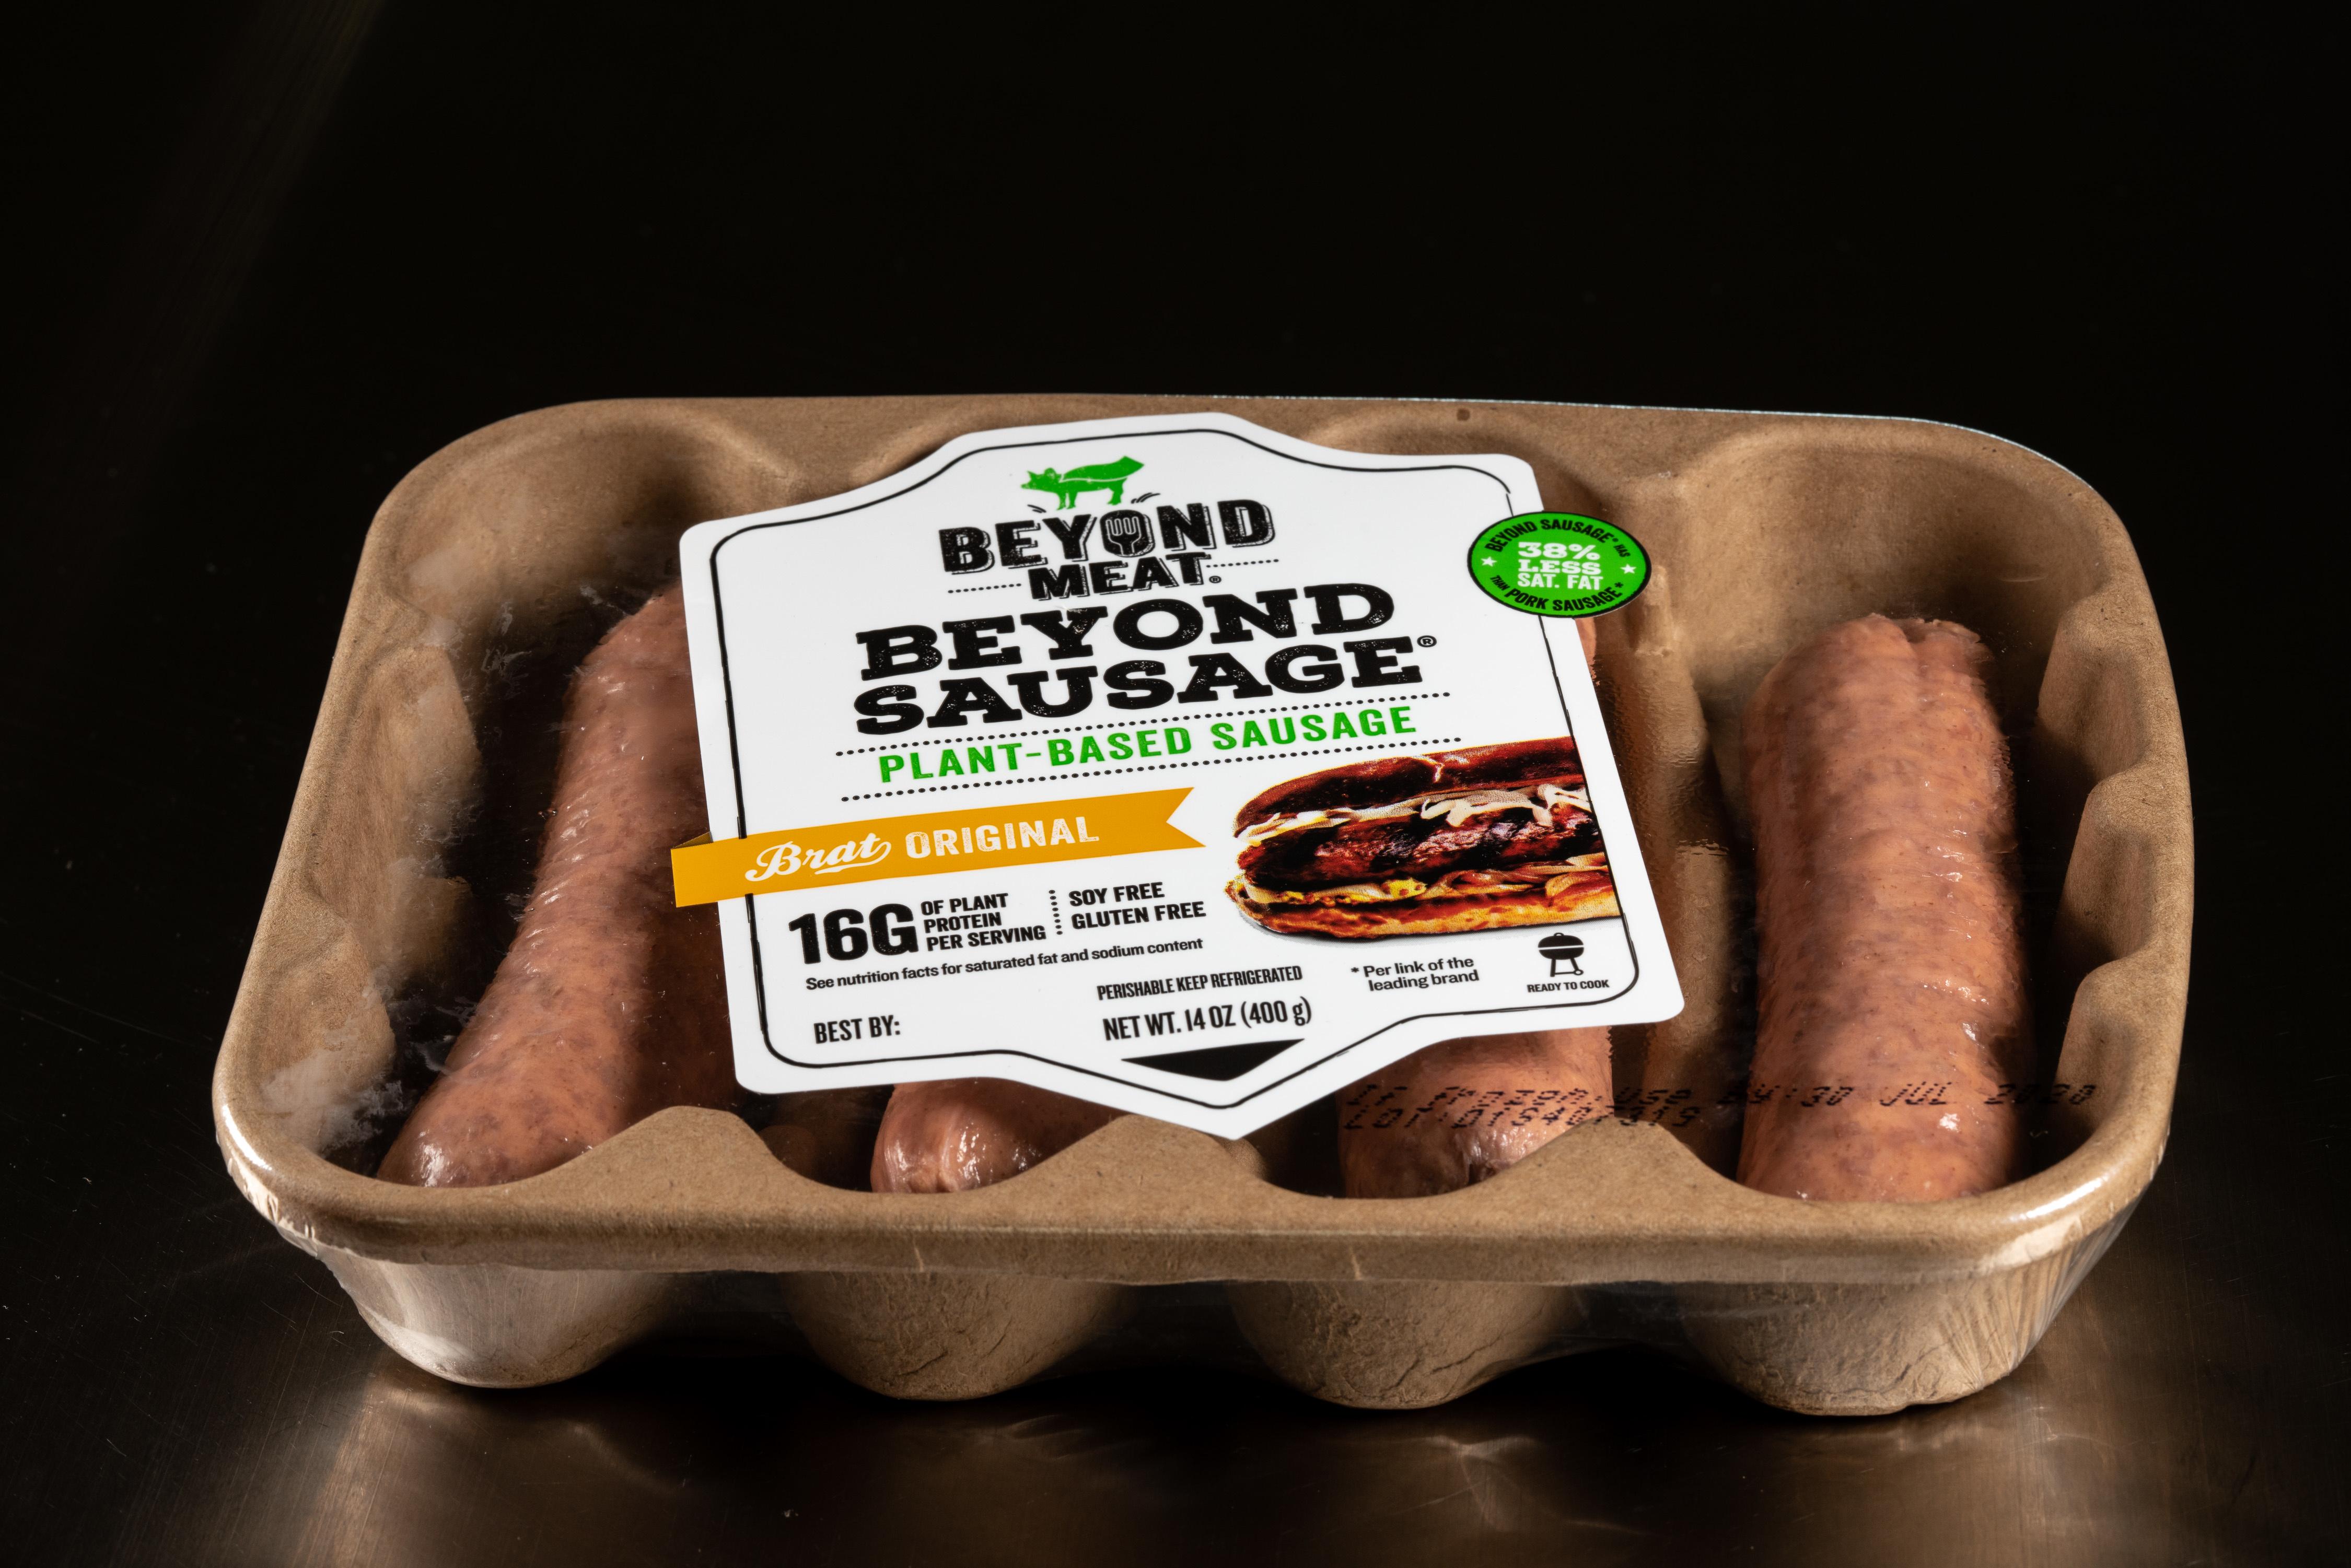 beyond meat stock today